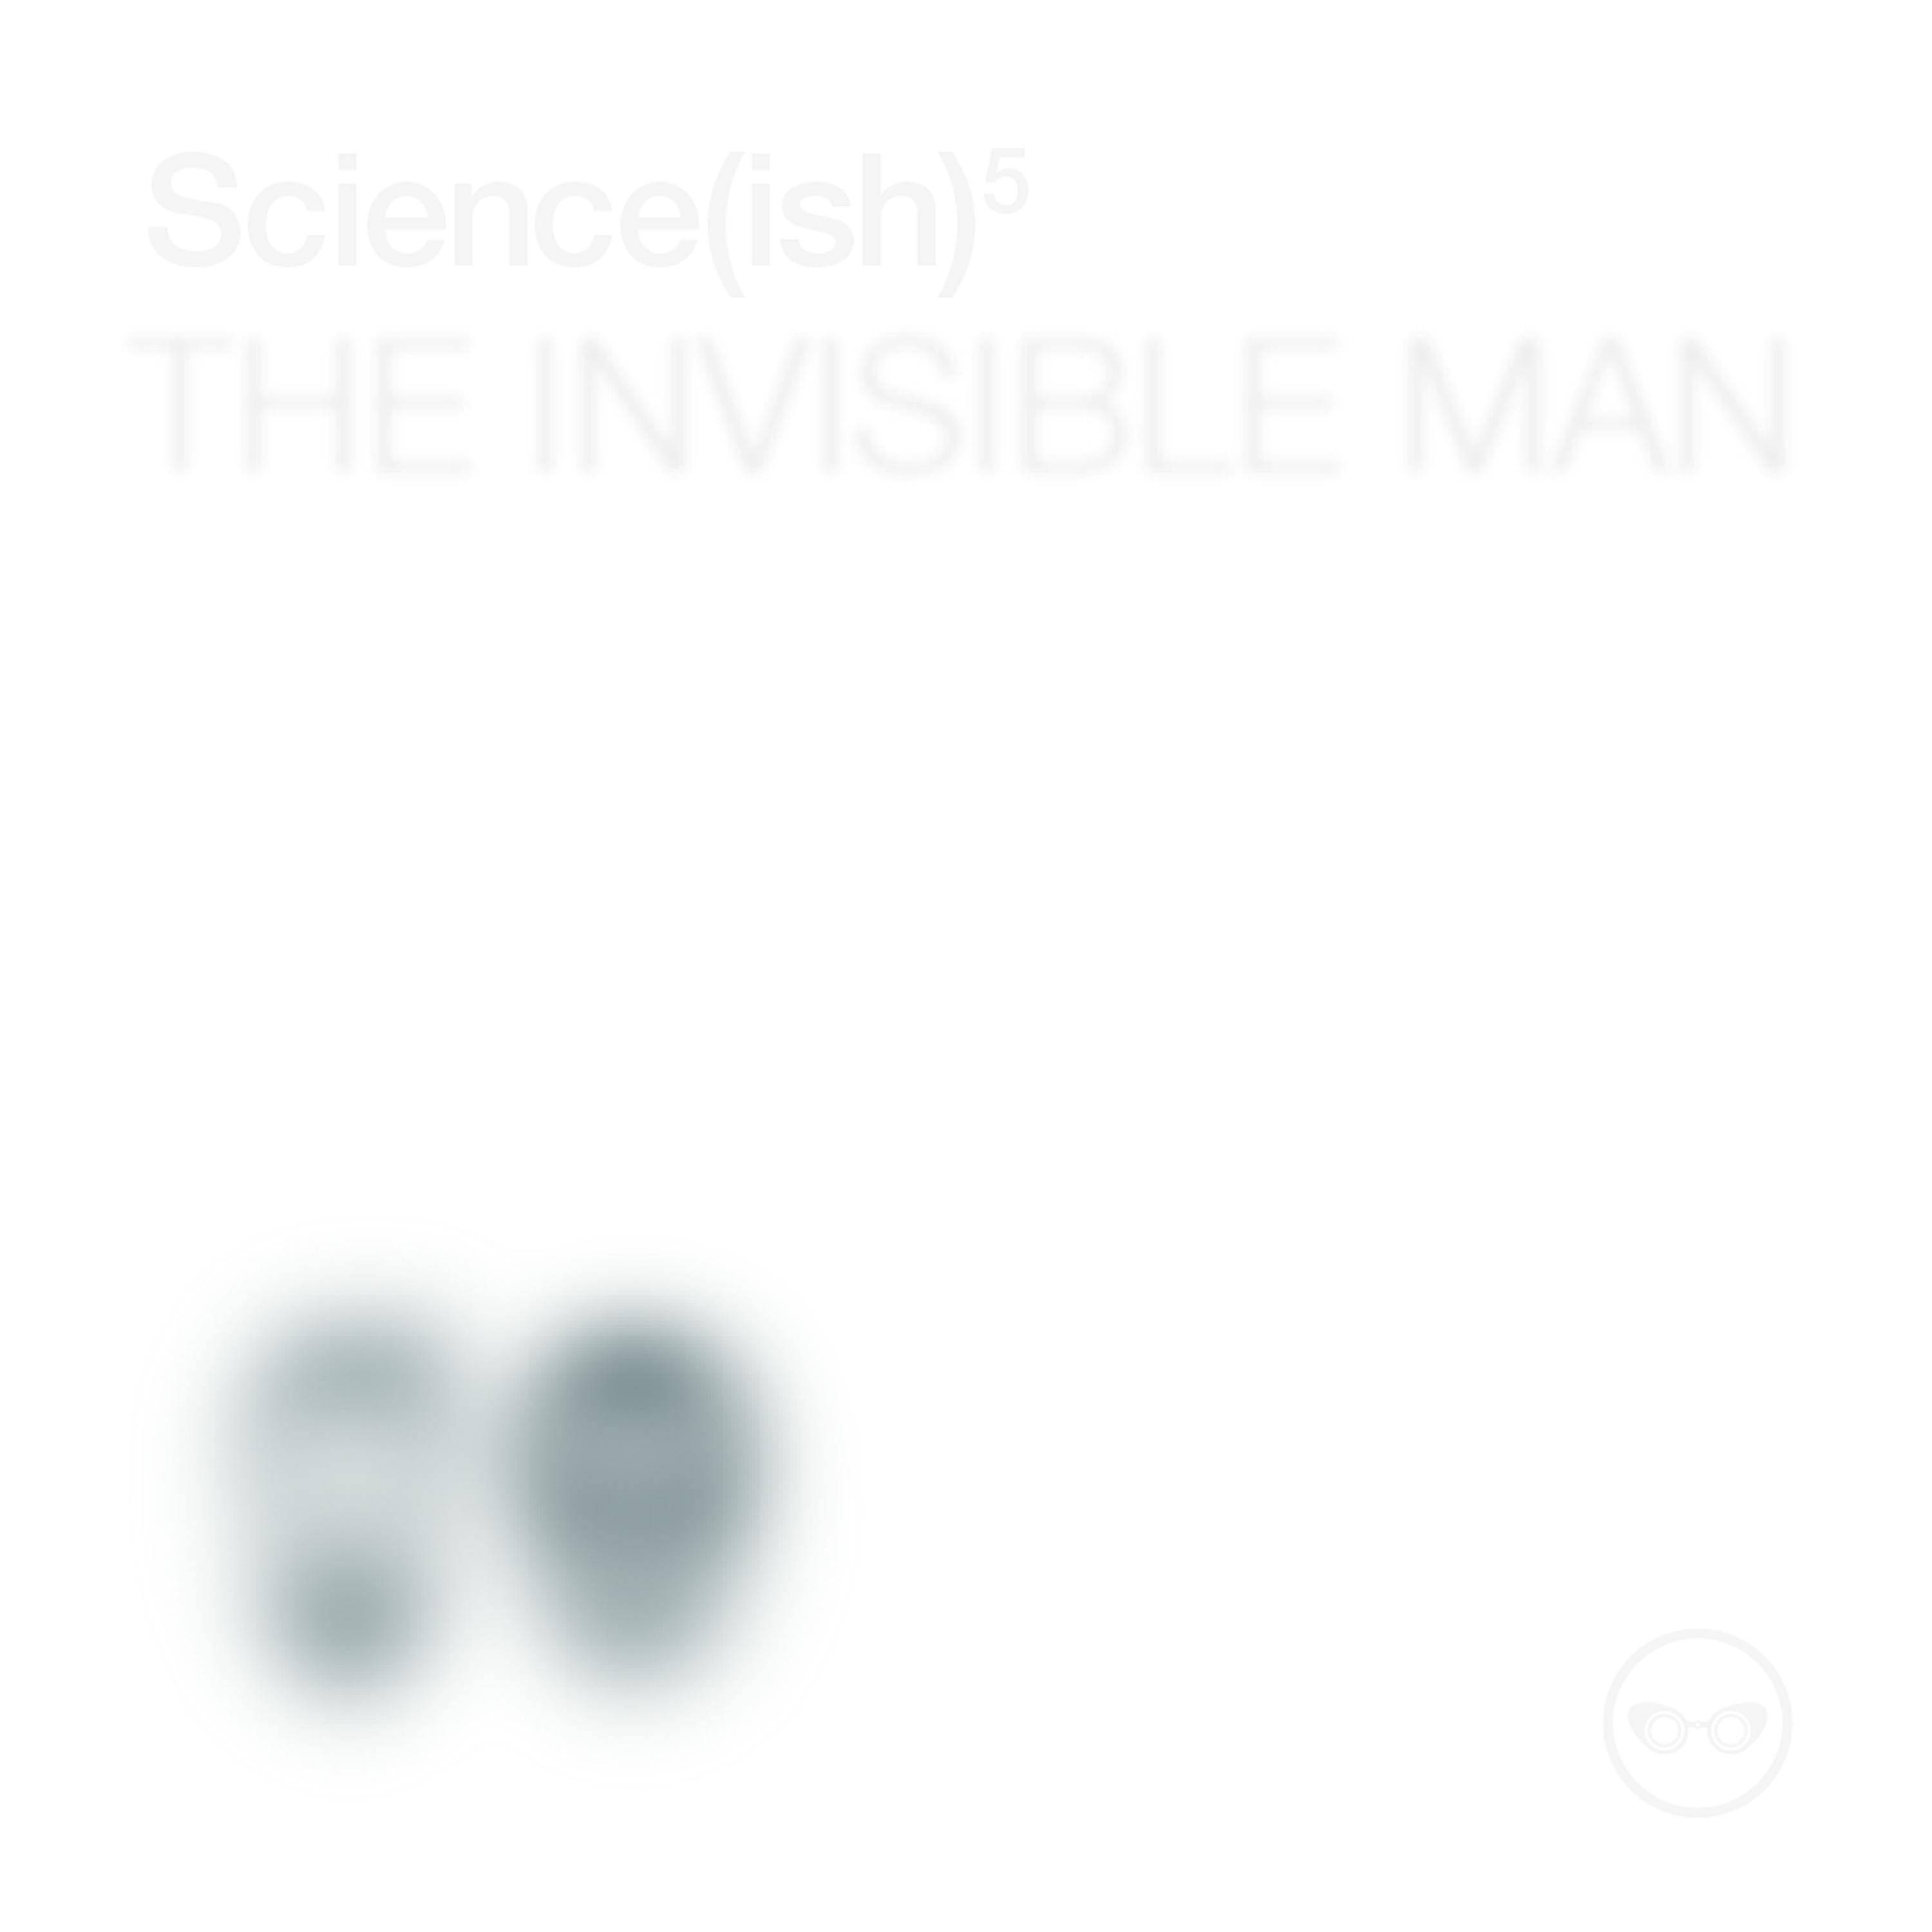 8: Episode 100: The Invisible Man